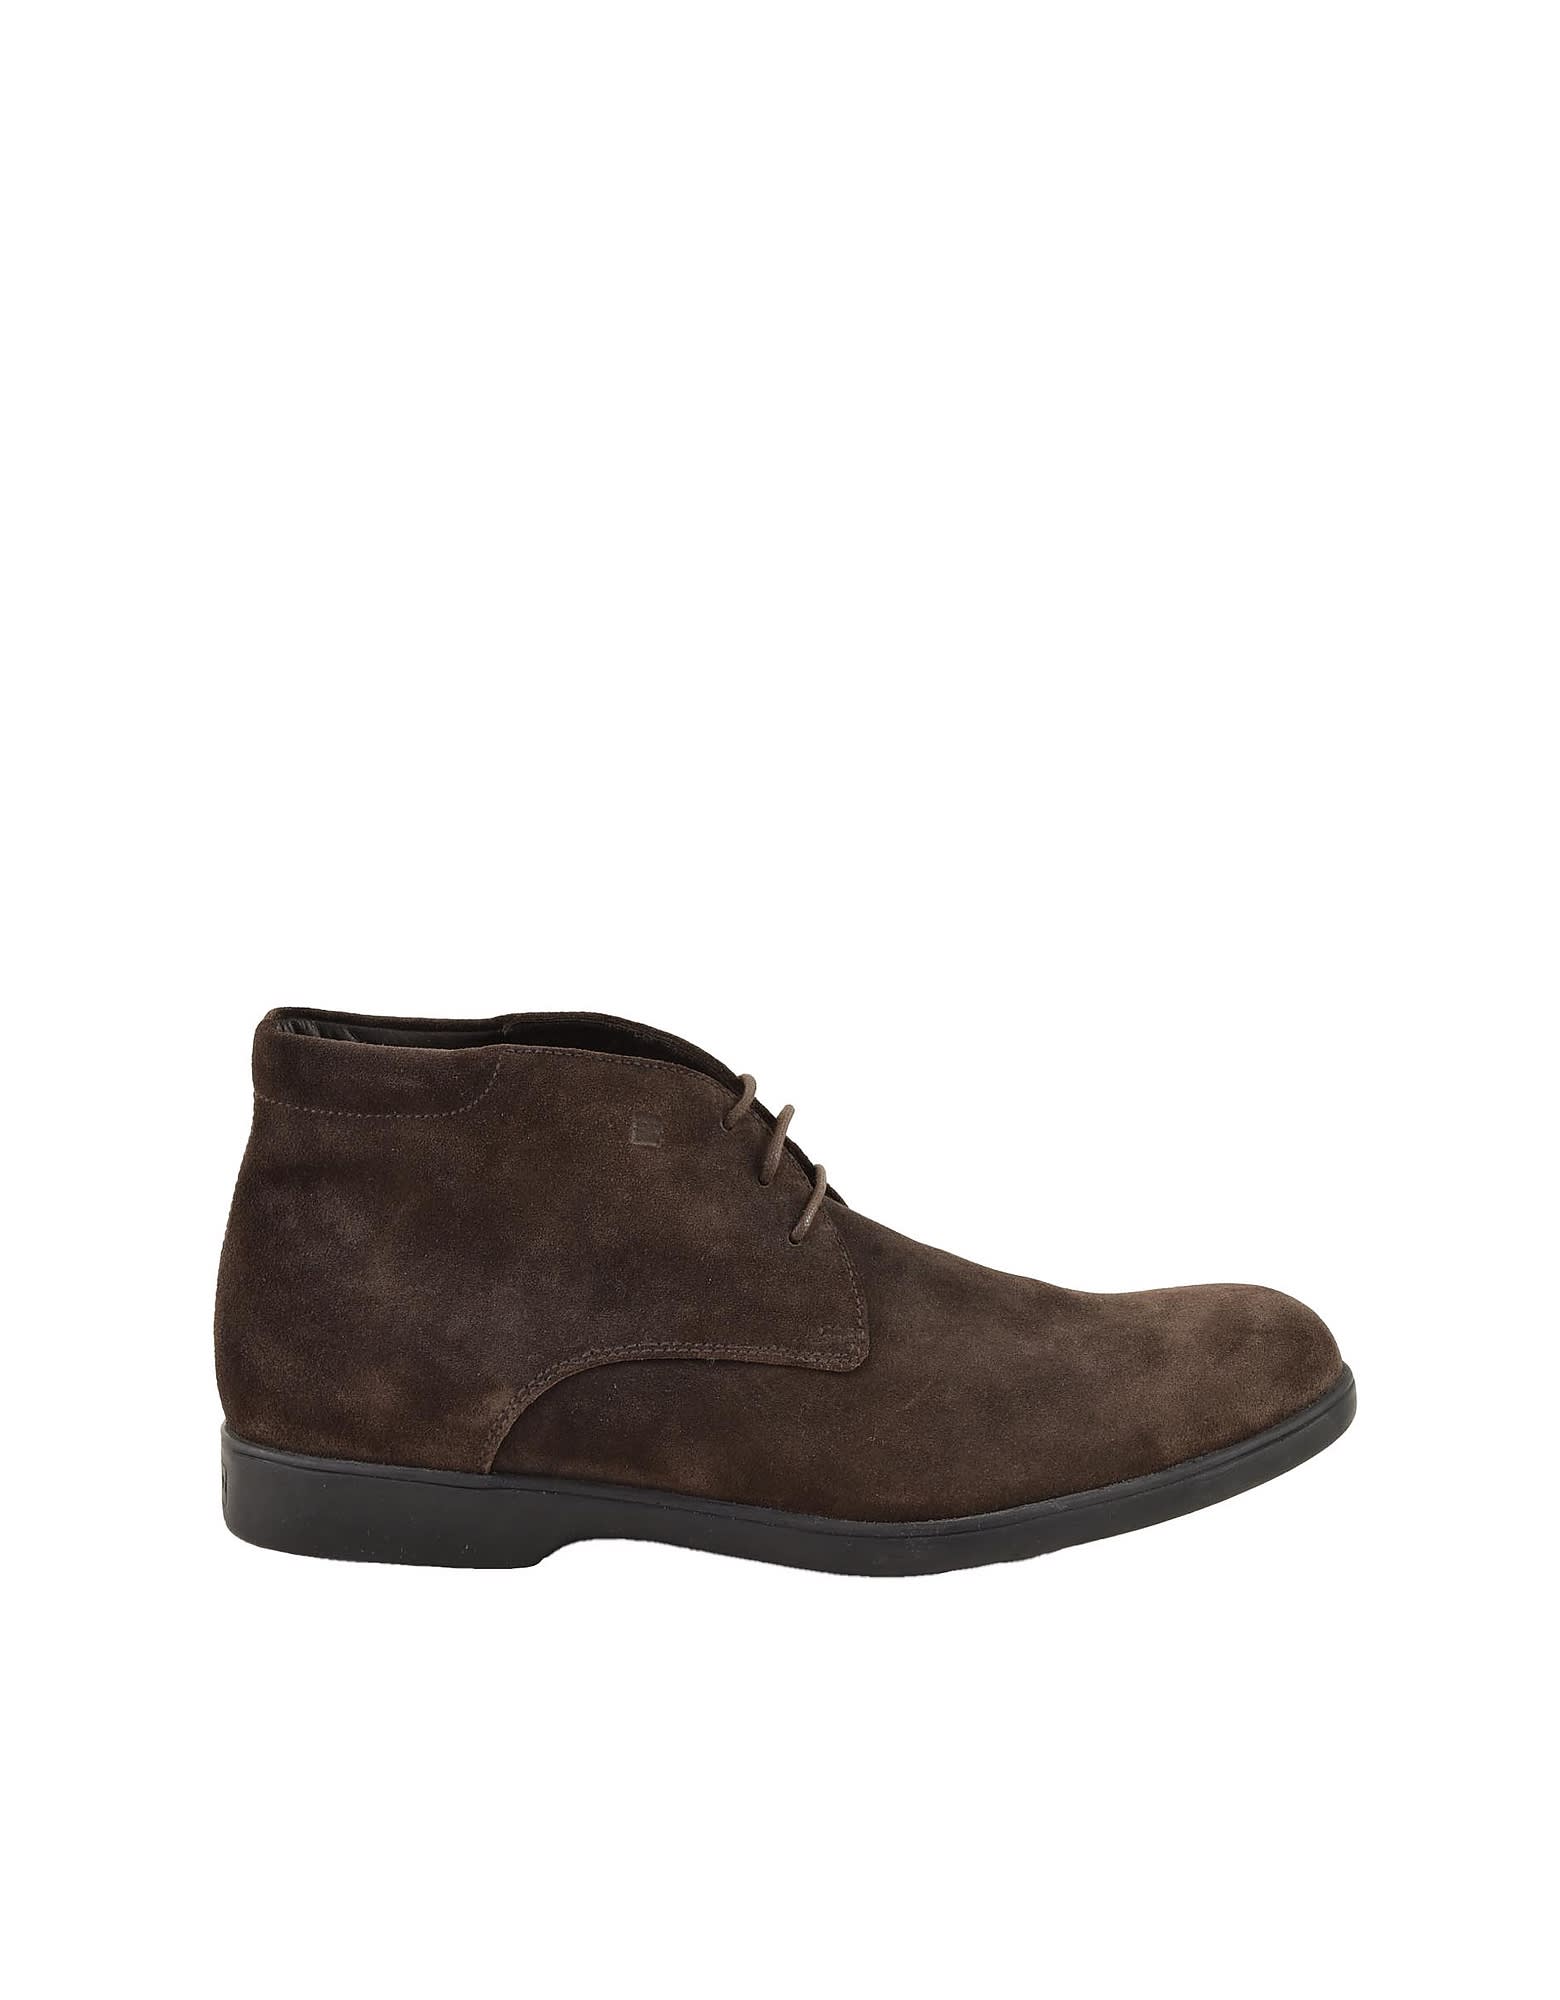 Fratelli Rossetti Mens Brown Shoes